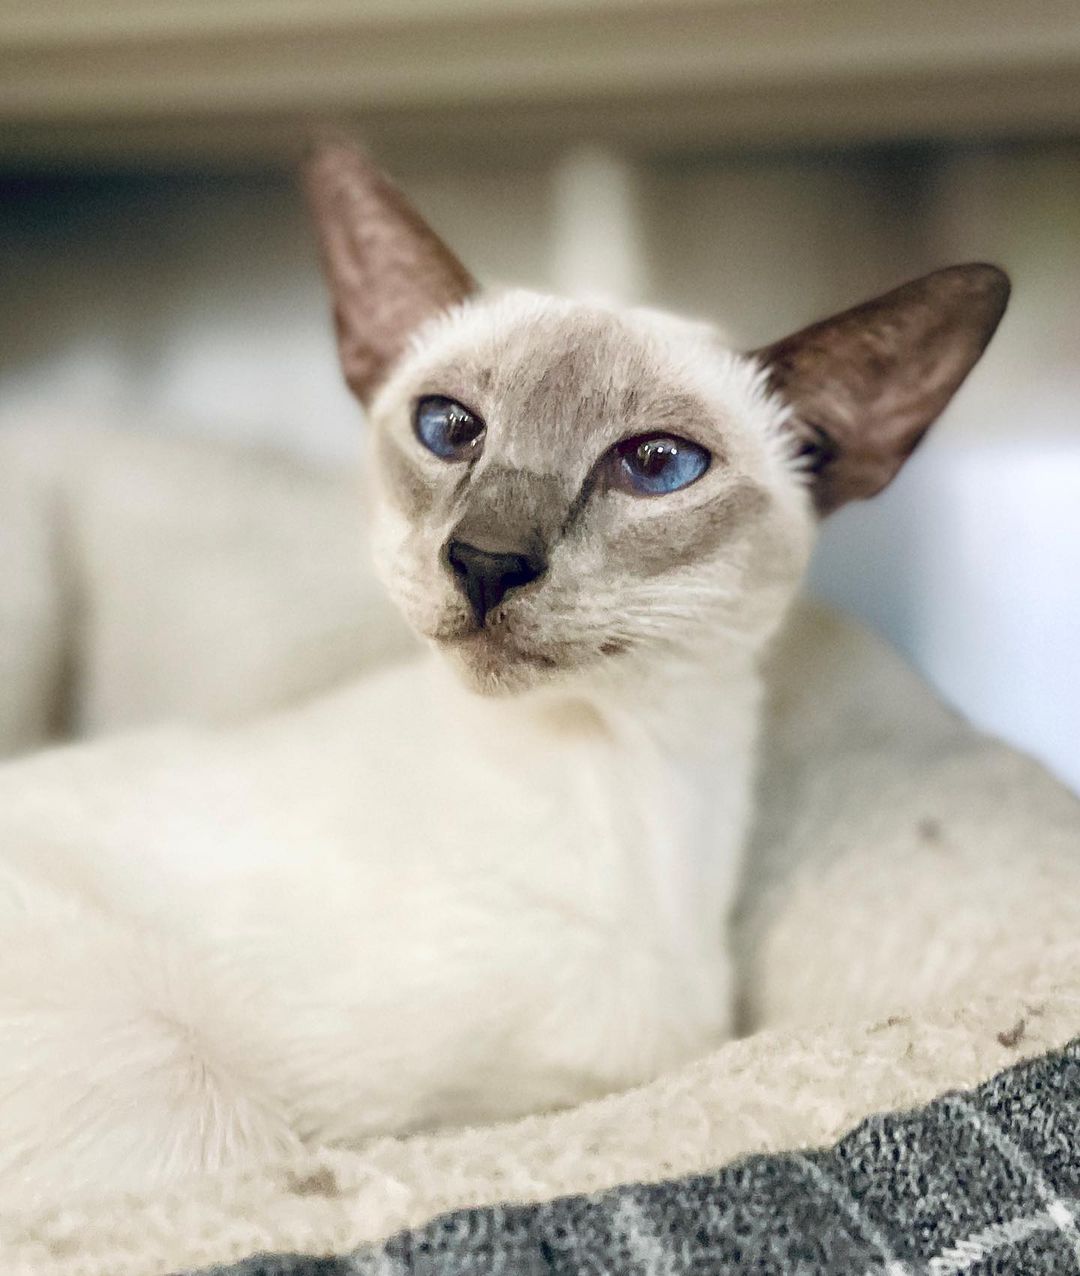 Say hello Dolly to our exquisite modern Siamese cat with the magical cornflower blue eyes! She mews and purrs simultaneously and is an elegant delight!

Fill out an application today and come and chat with her!

Look at those cheekbones and facial fur contour markings!

<a target='_blank' href='https://www.instagram.com/explore/tags/siamesecat/'>#siamesecat</a> <a target='_blank' href='https://www.instagram.com/explore/tags/rescuesiamese/'>#rescuesiamese</a> <a target='_blank' href='https://www.instagram.com/explore/tags/rescuesiamesecat/'>#rescuesiamesecat</a> <a target='_blank' href='https://www.instagram.com/explore/tags/siamesepurr/'>#siamesepurr</a> <a target='_blank' href='https://www.instagram.com/explore/tags/chattycat/'>#chattycat</a> <a target='_blank' href='https://www.instagram.com/explore/tags/elegantcat/'>#elegantcat</a> <a target='_blank' href='https://www.instagram.com/explore/tags/asiancat/'>#asiancat</a> <a target='_blank' href='https://www.instagram.com/explore/tags/asiancatsofinstagram/'>#asiancatsofinstagram</a> <a target='_blank' href='https://www.instagram.com/explore/tags/meezer/'>#meezer</a> <a target='_blank' href='https://www.instagram.com/explore/tags/meezersofinstagram/'>#meezersofinstagram</a> <a target='_blank' href='https://www.instagram.com/explore/tags/meezers/'>#meezers</a>